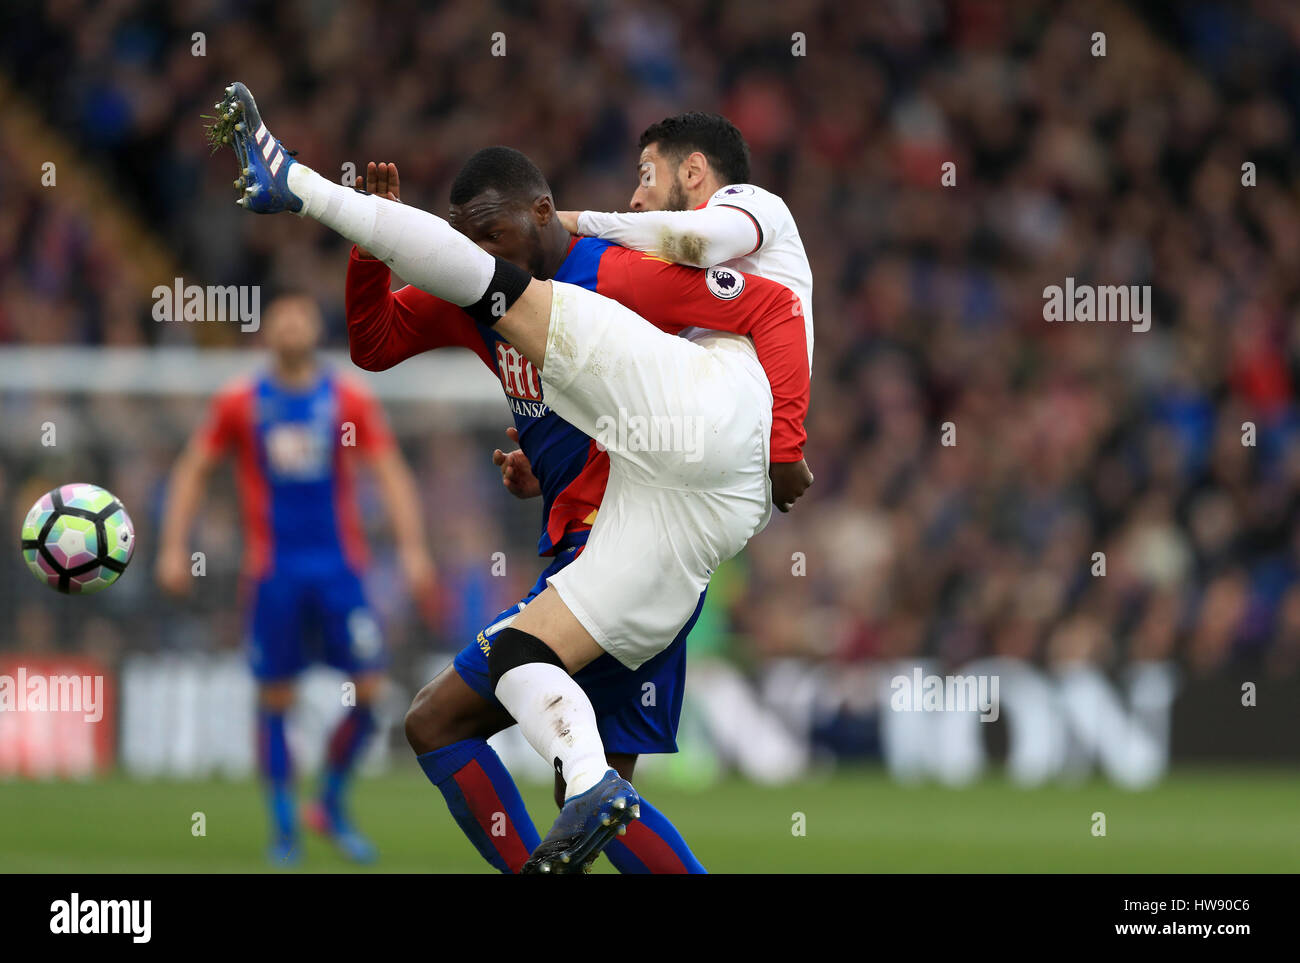 Crystal Palace's Christian Benteke (left) and Watford's Miguel Britos (right) battle for the ball during the Premier League match at Selhurst Park, London. PRESS ASSOCIATION Photo. Picture date: Saturday March 18, 2017. See PA story SOCCER Palace. Photo credit should read: John Walton/PA Wire. RESTRICTIONS: No use with unauthorised audio, video, data, fixture lists, club/league logos or 'live' services. Online in-match use limited to 75 images, no video emulation. No use in betting, games or single club/league/player publications. Stock Photo